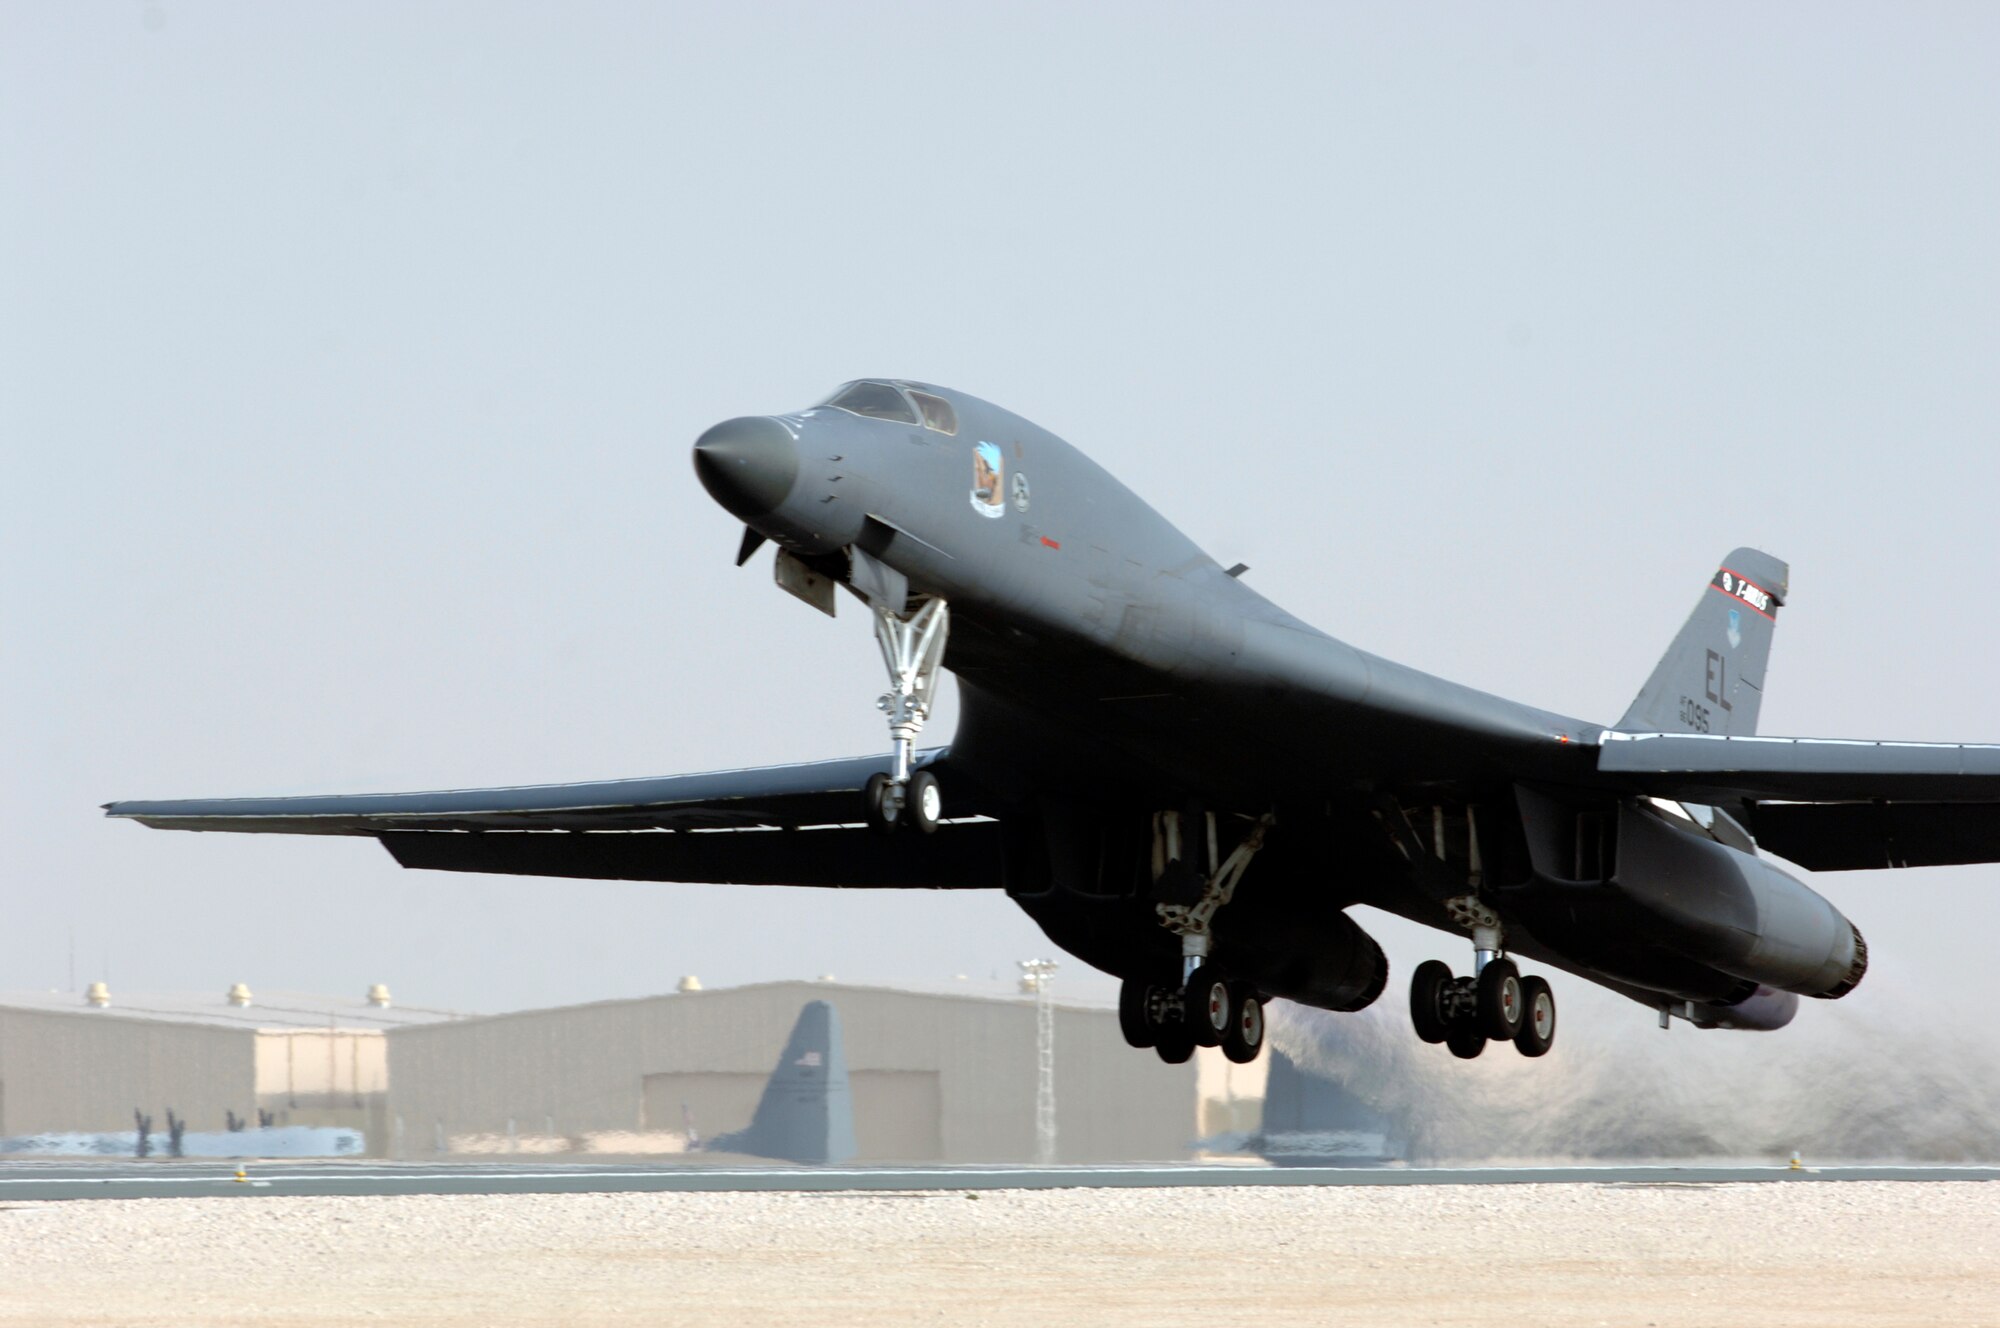 A B-1B Bomber takes off from the 379th Air Expeditionary Wing. B-1s from the 34th Expeditionary Bomb Squadron were once again called on to increase operations in support of ground forces in Afghanistan through precision bombing and shows of force and presence.